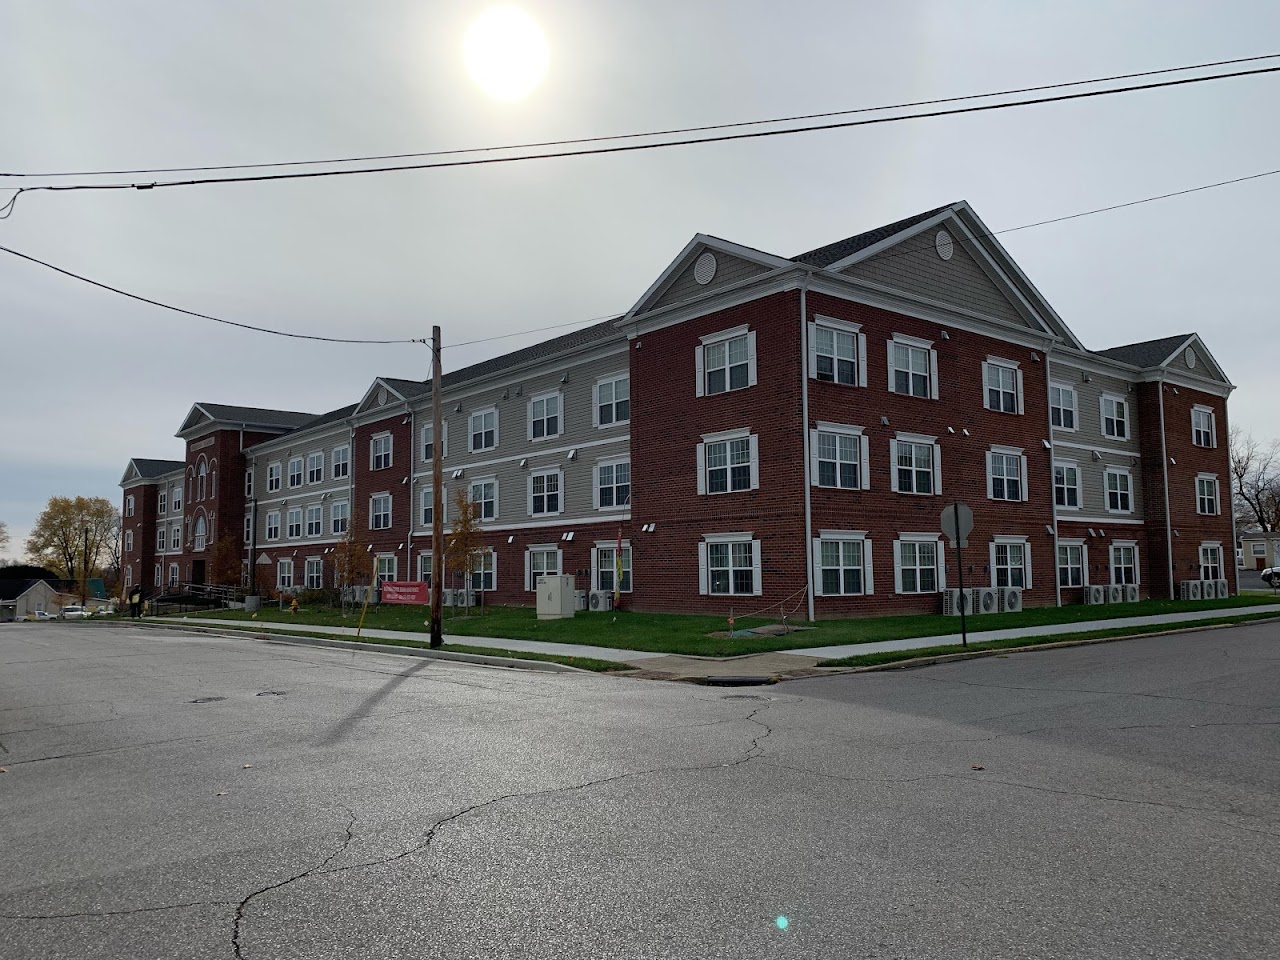 Photo of AUDUBON SCHOOL APARTMENTS. Affordable housing located at CLAY STREET HENDERSON, KY 42420